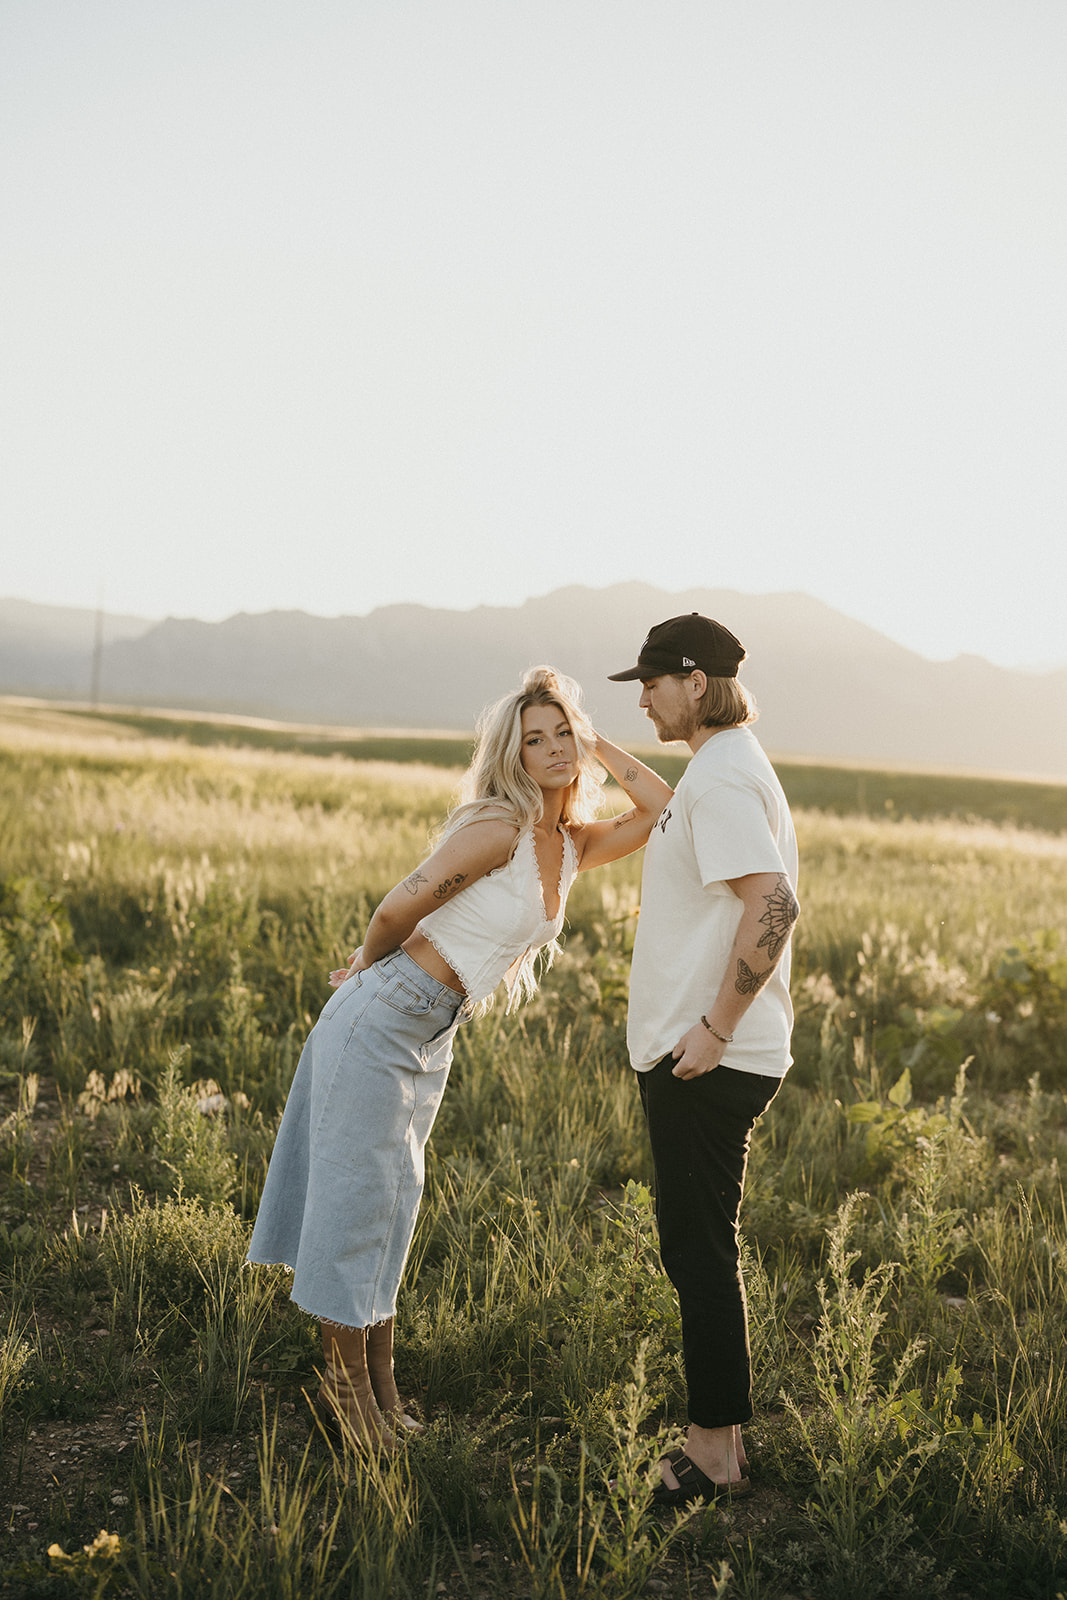 Engagement session in a big open field mountains in the background, unique couples session inspiration. 